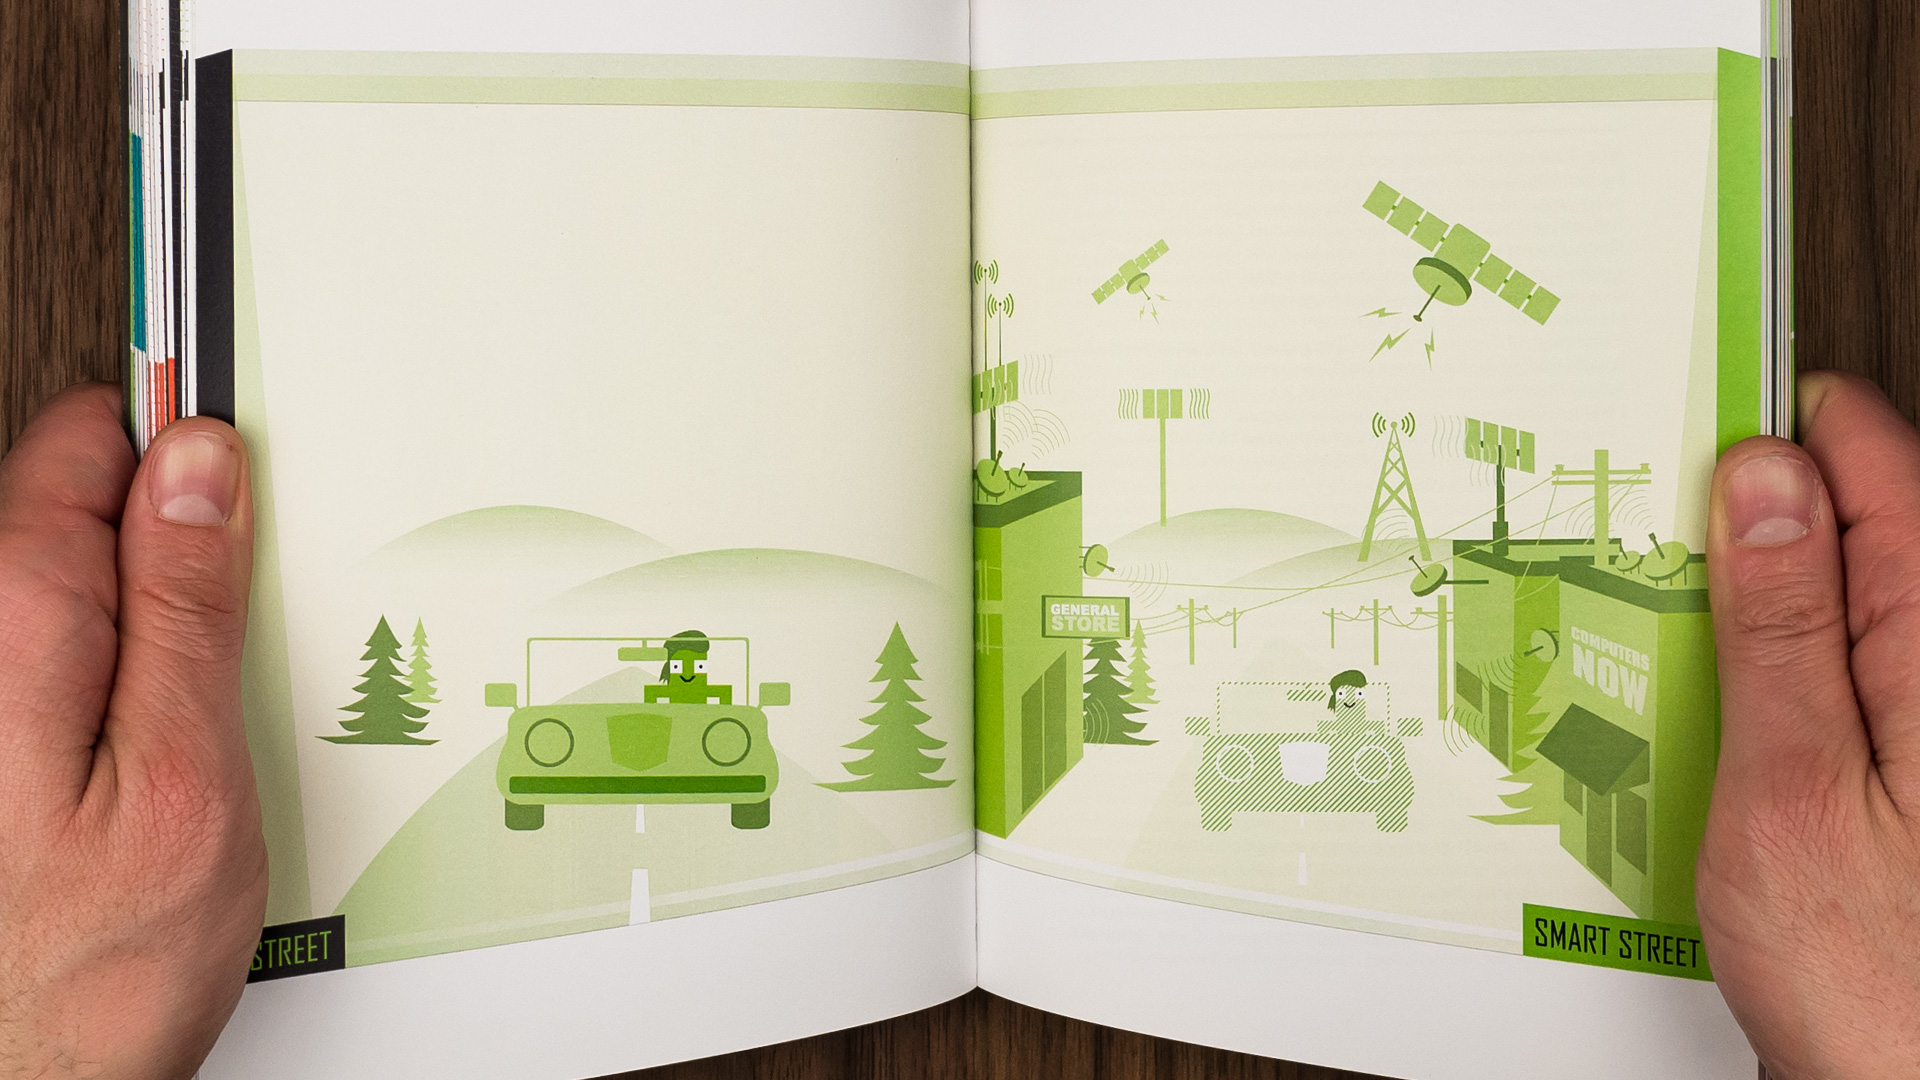 Illustration spread from Intel's Radical Flux book design created by Incubate Design